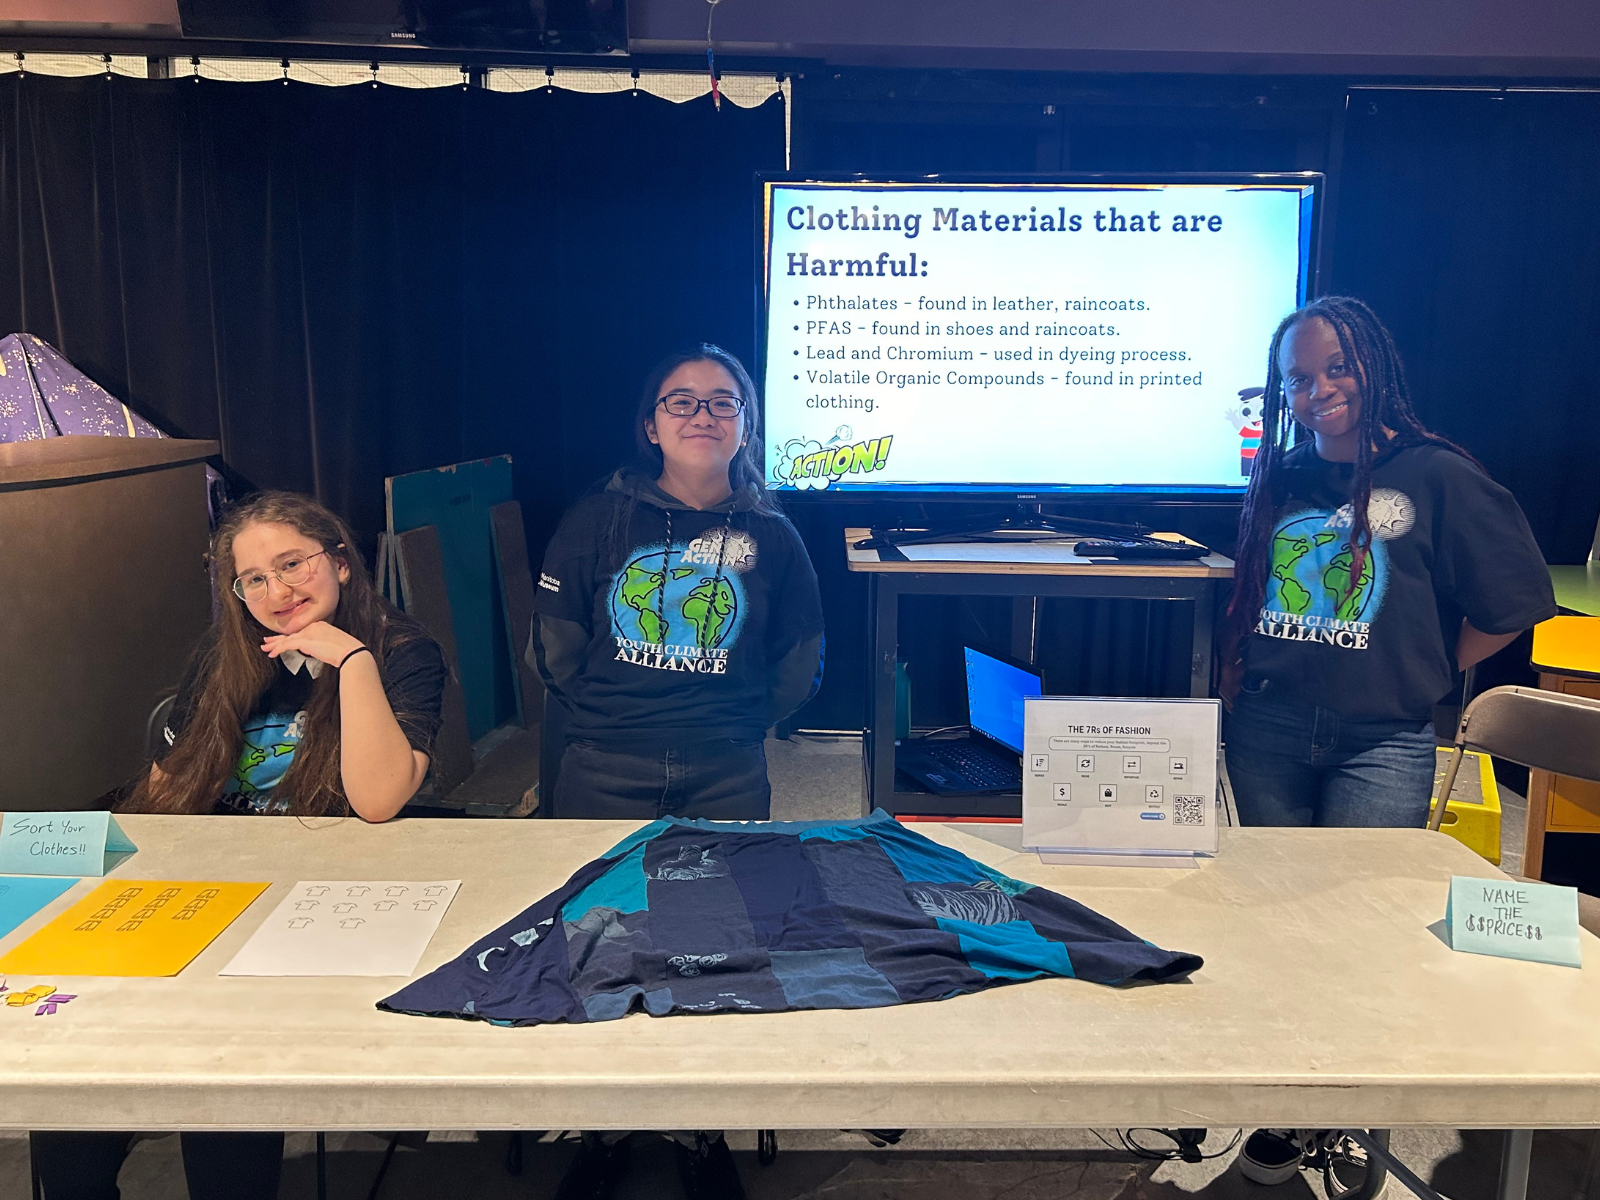 Three youth wearing Youth Climate Alliance t-shirts stand behind a pop-up exhibit table with a shirt laid out in front of them. On a screen behind them text reads, "Clothing Materials that are Harmful:"